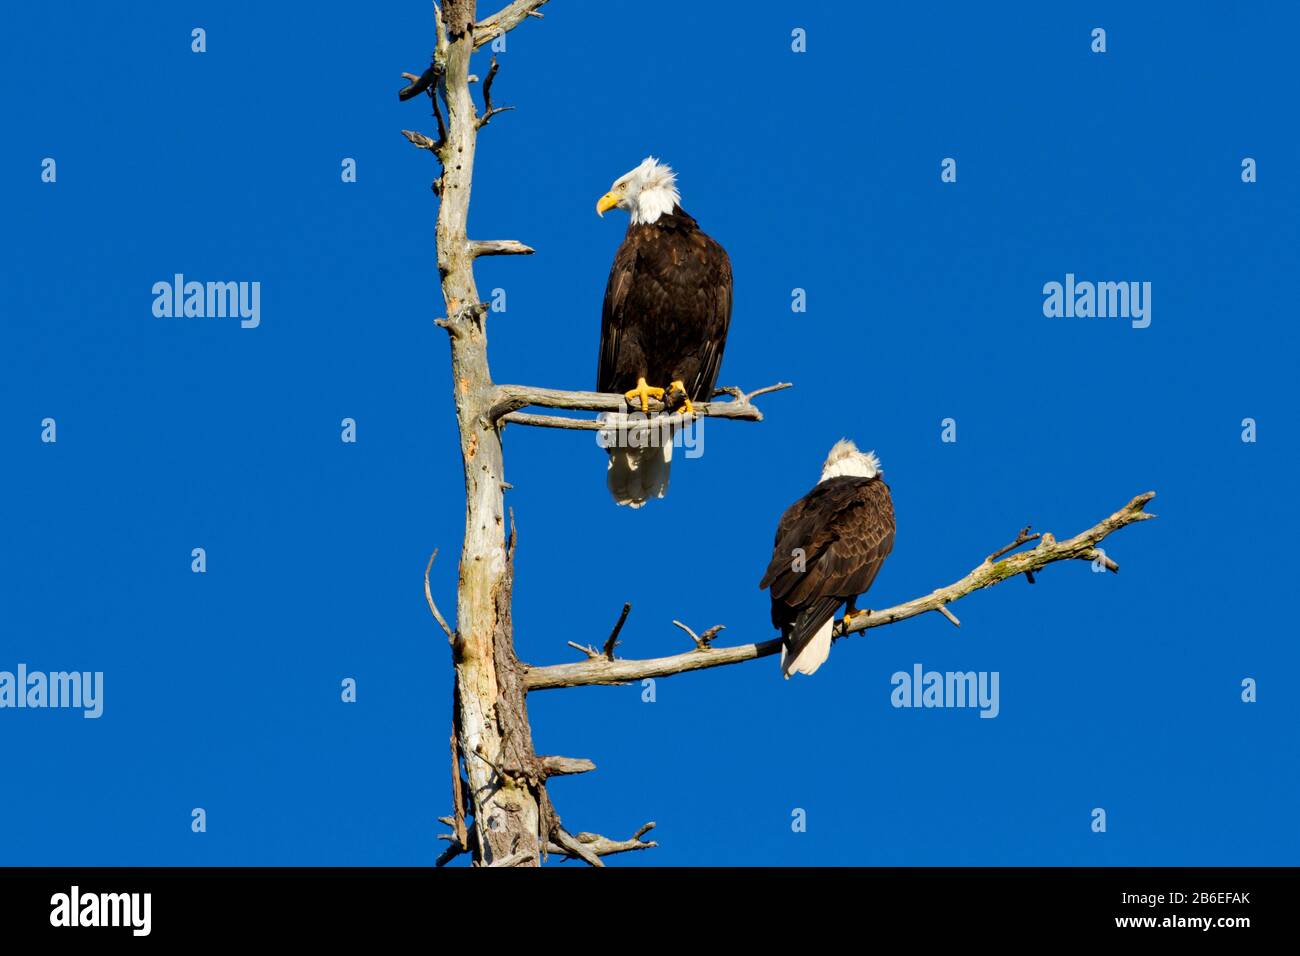 Two Bald Eagles (Haliaeetus leucocephalus) perched on dead branches of a douglas fir tree along the coast at Nanaimo, Vancouver Island, BC, Canada Stock Photo